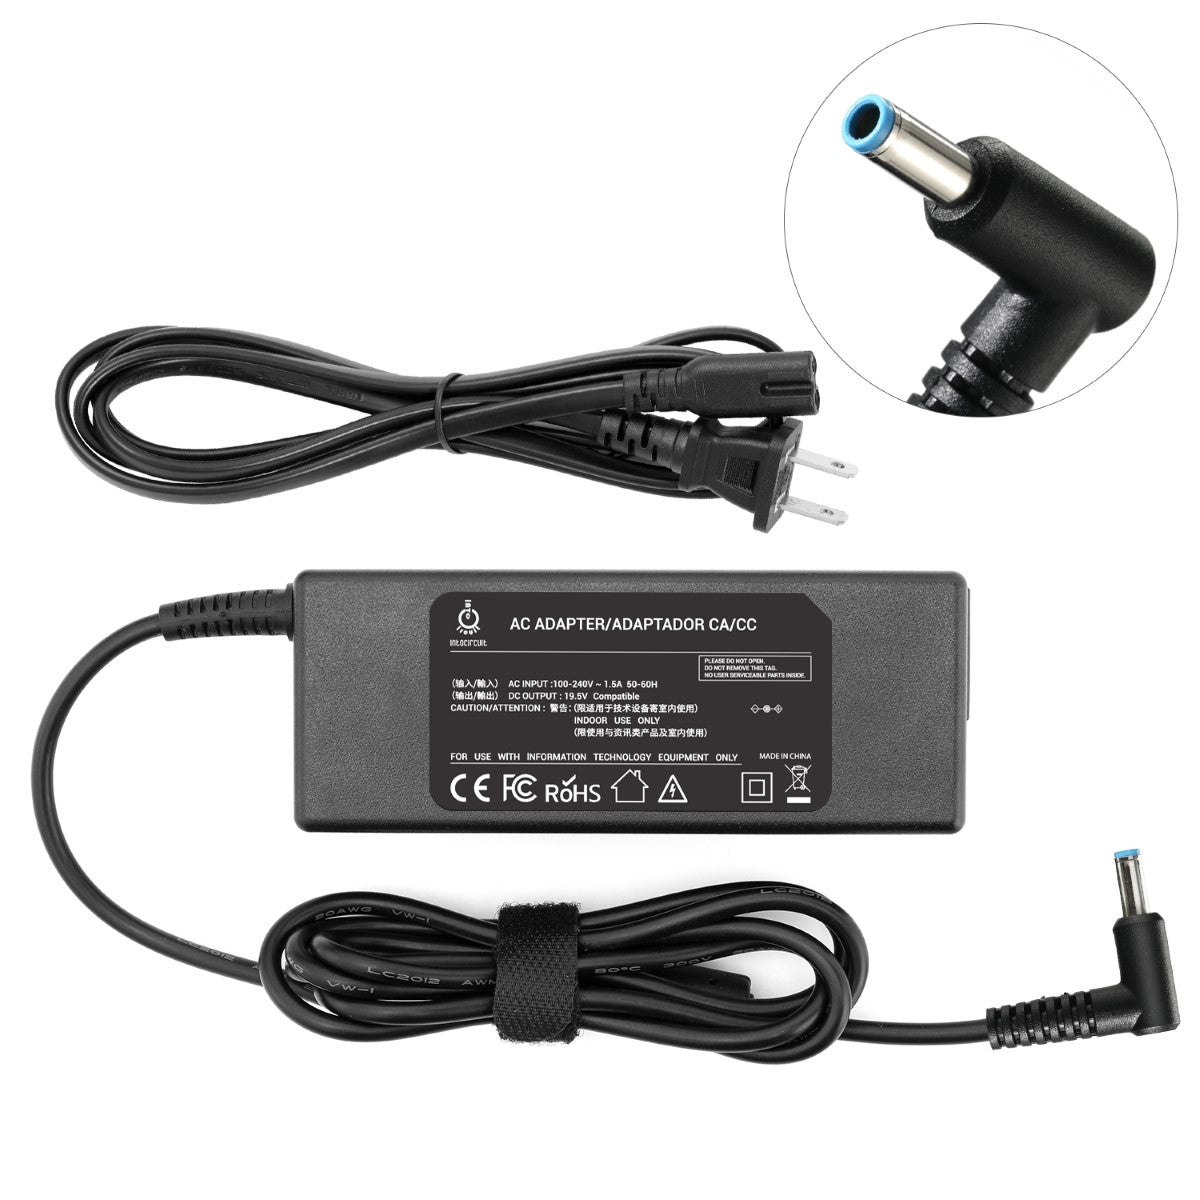 Charger for HP 15-p020us Laptop